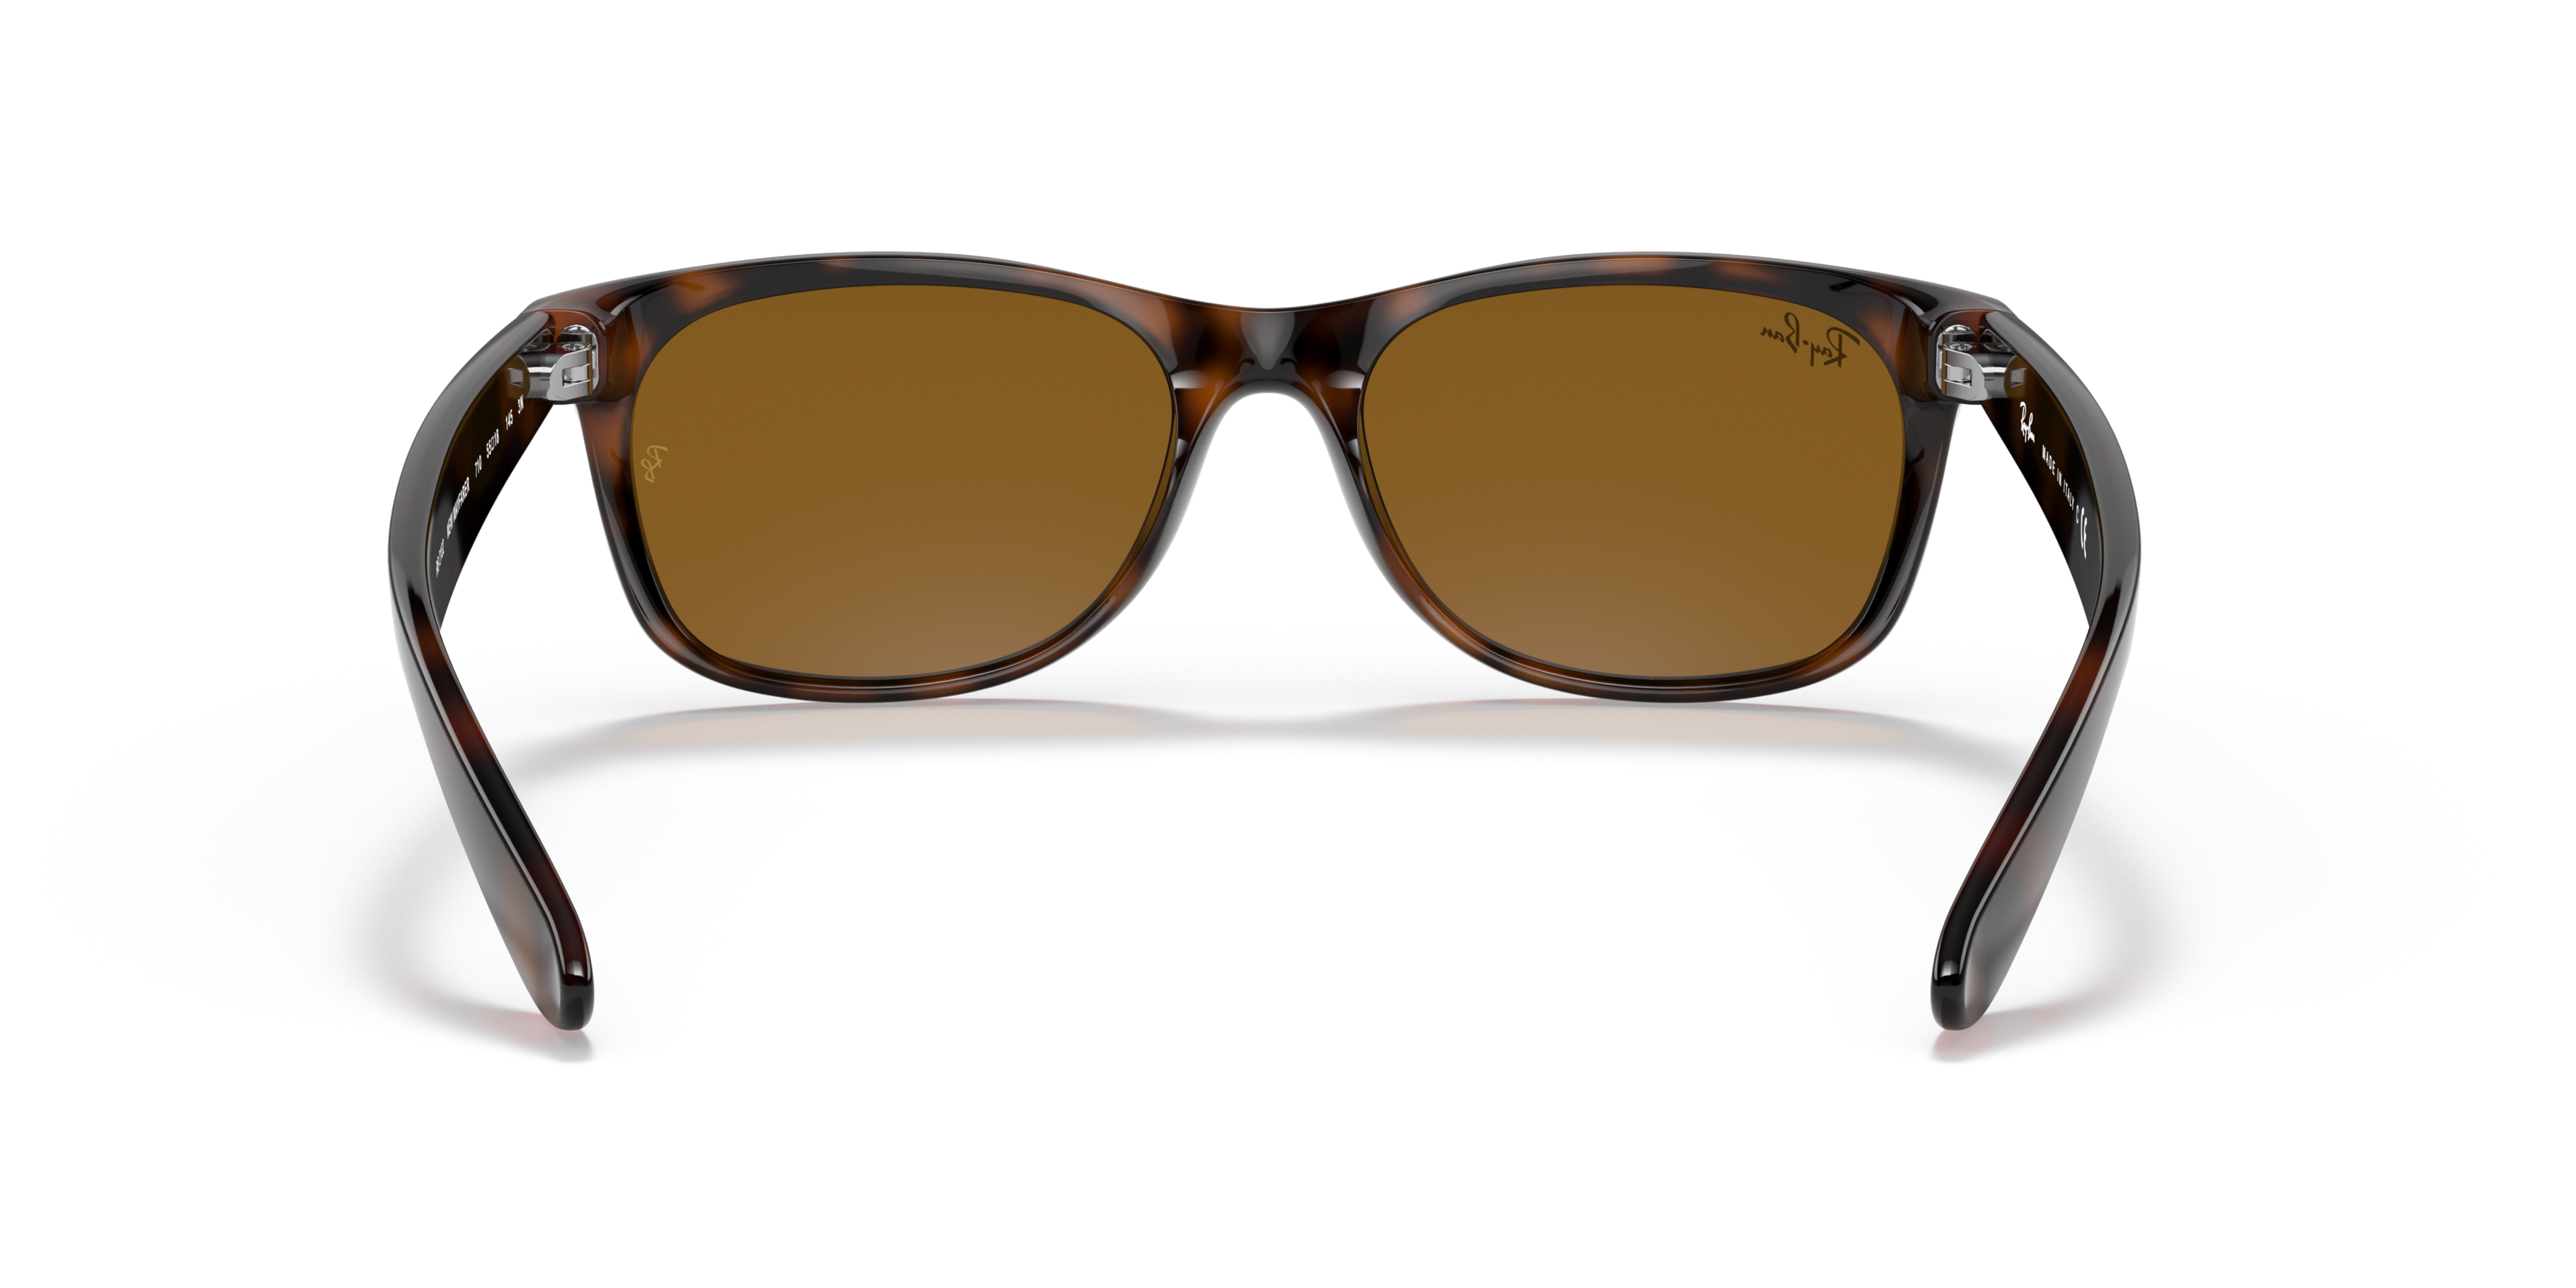 [products.image.detail02] Ray-Ban NEW WAYFARER RB2132 710